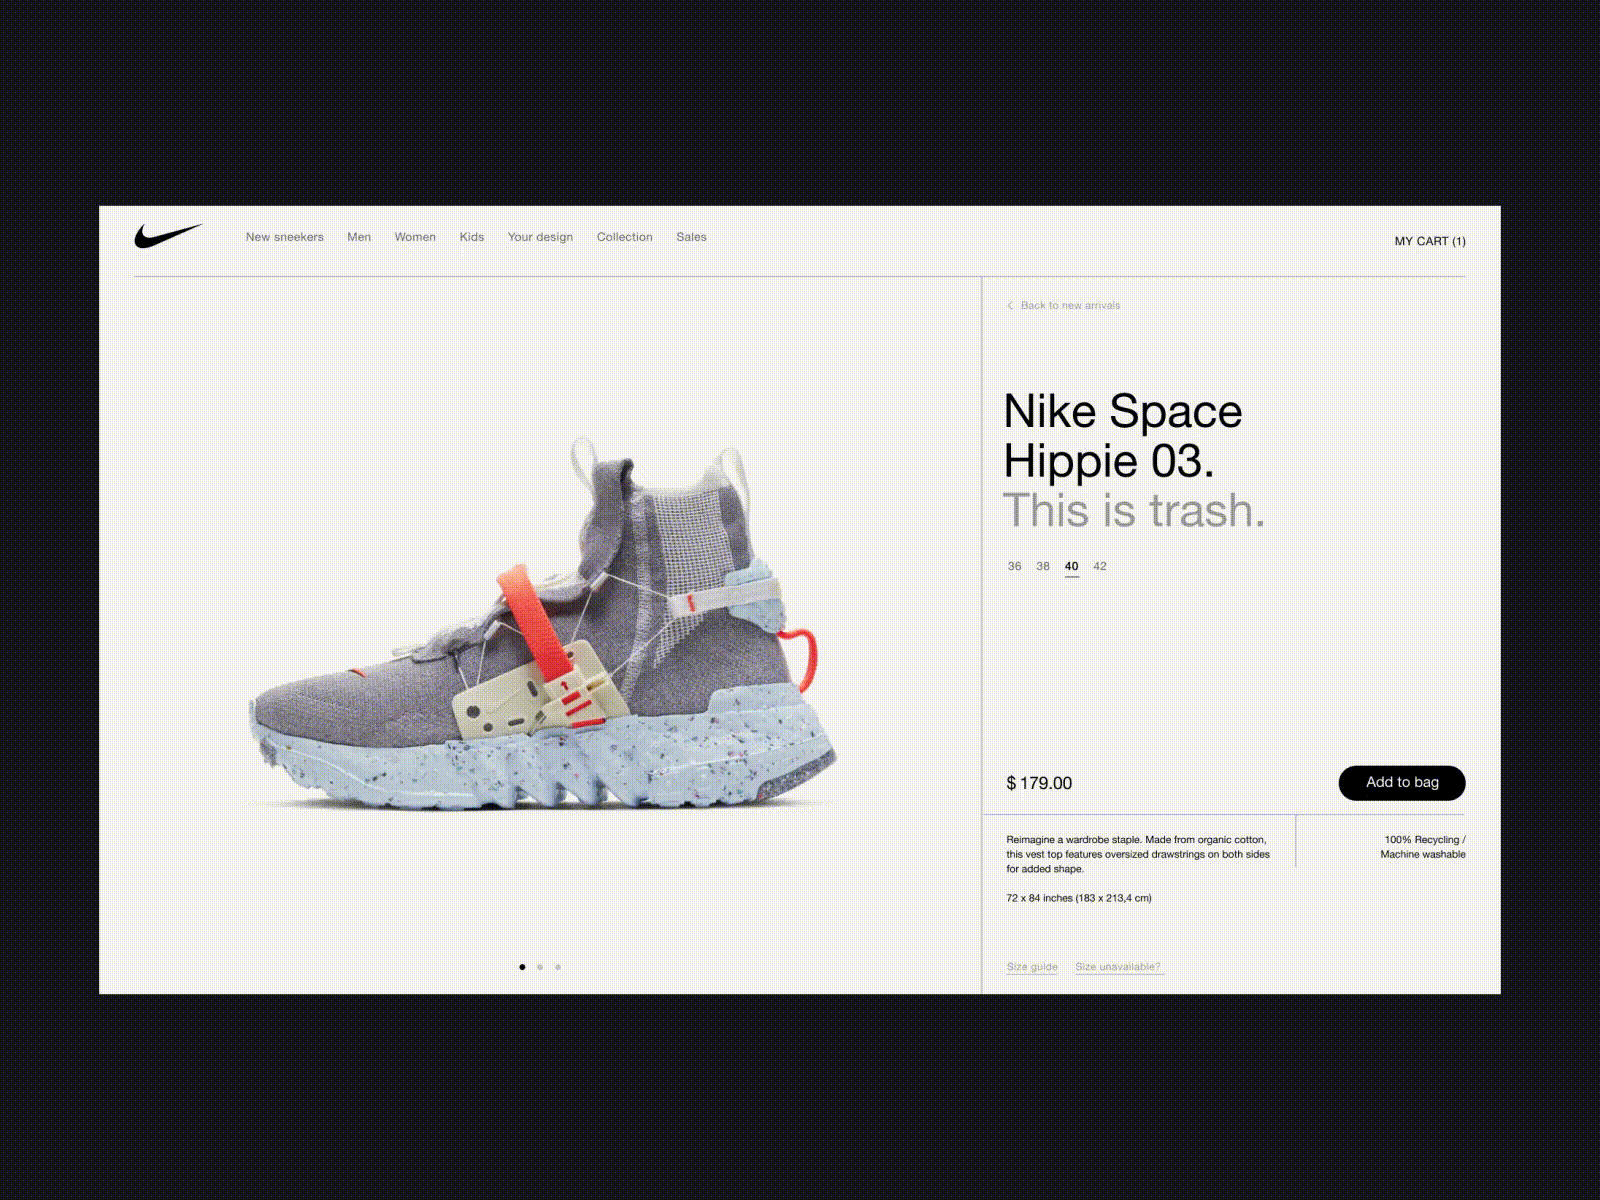 Nike Space Hippie Cart adding adidas aftereffects bag buying card cart clothing gallery grid helvetica nike purchase shoes size slider sneekers store swiss video